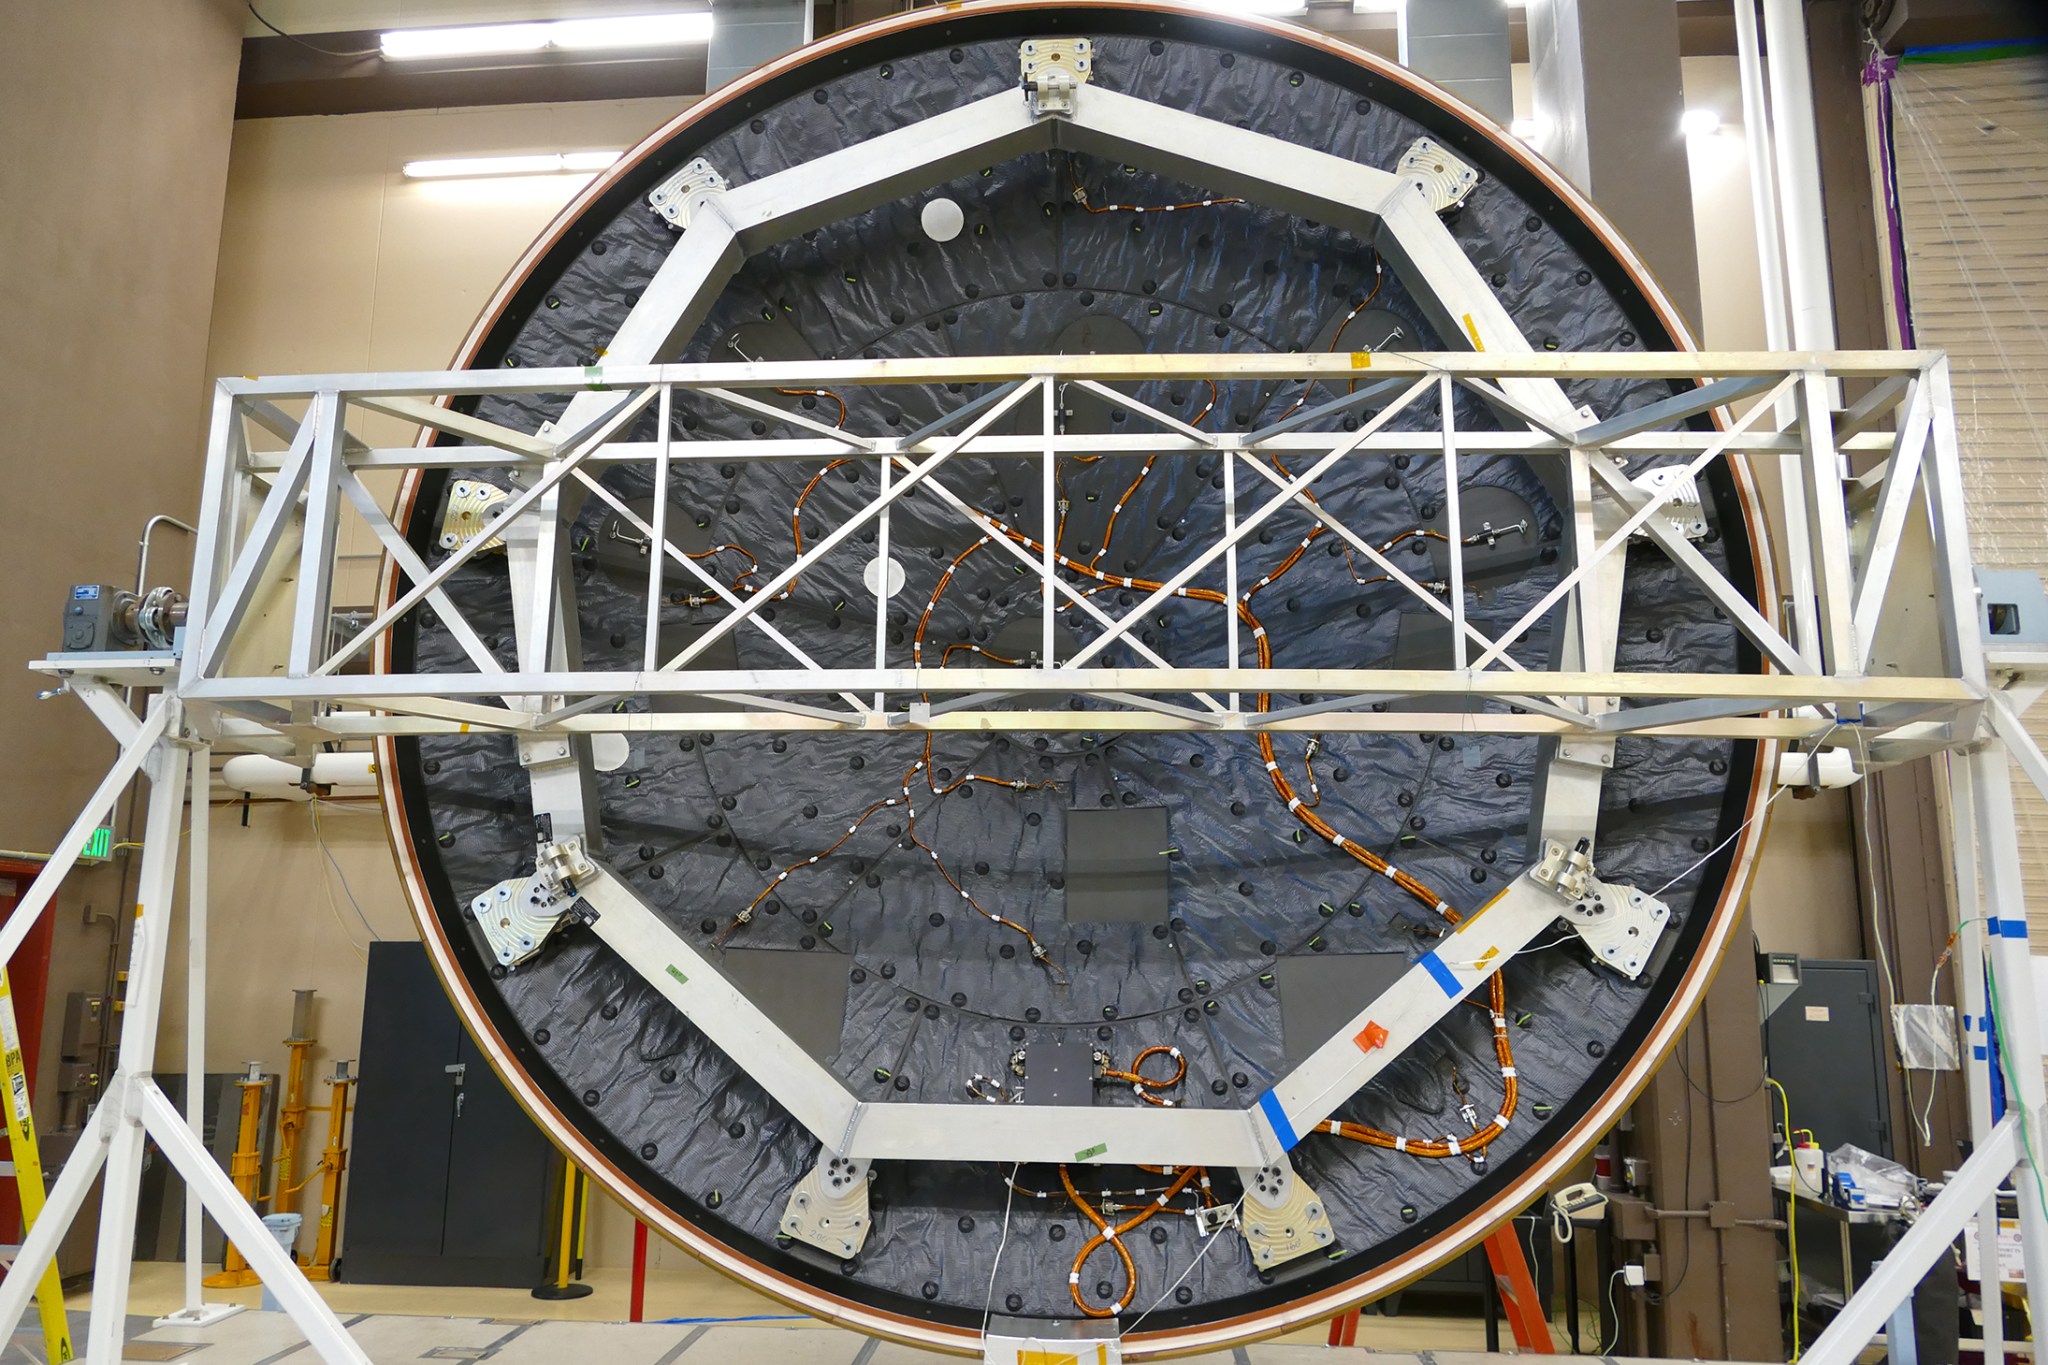 MEDLI2 sensors, electronics, and harnessing installed on the inner surface of the Mars 2020 heat shield